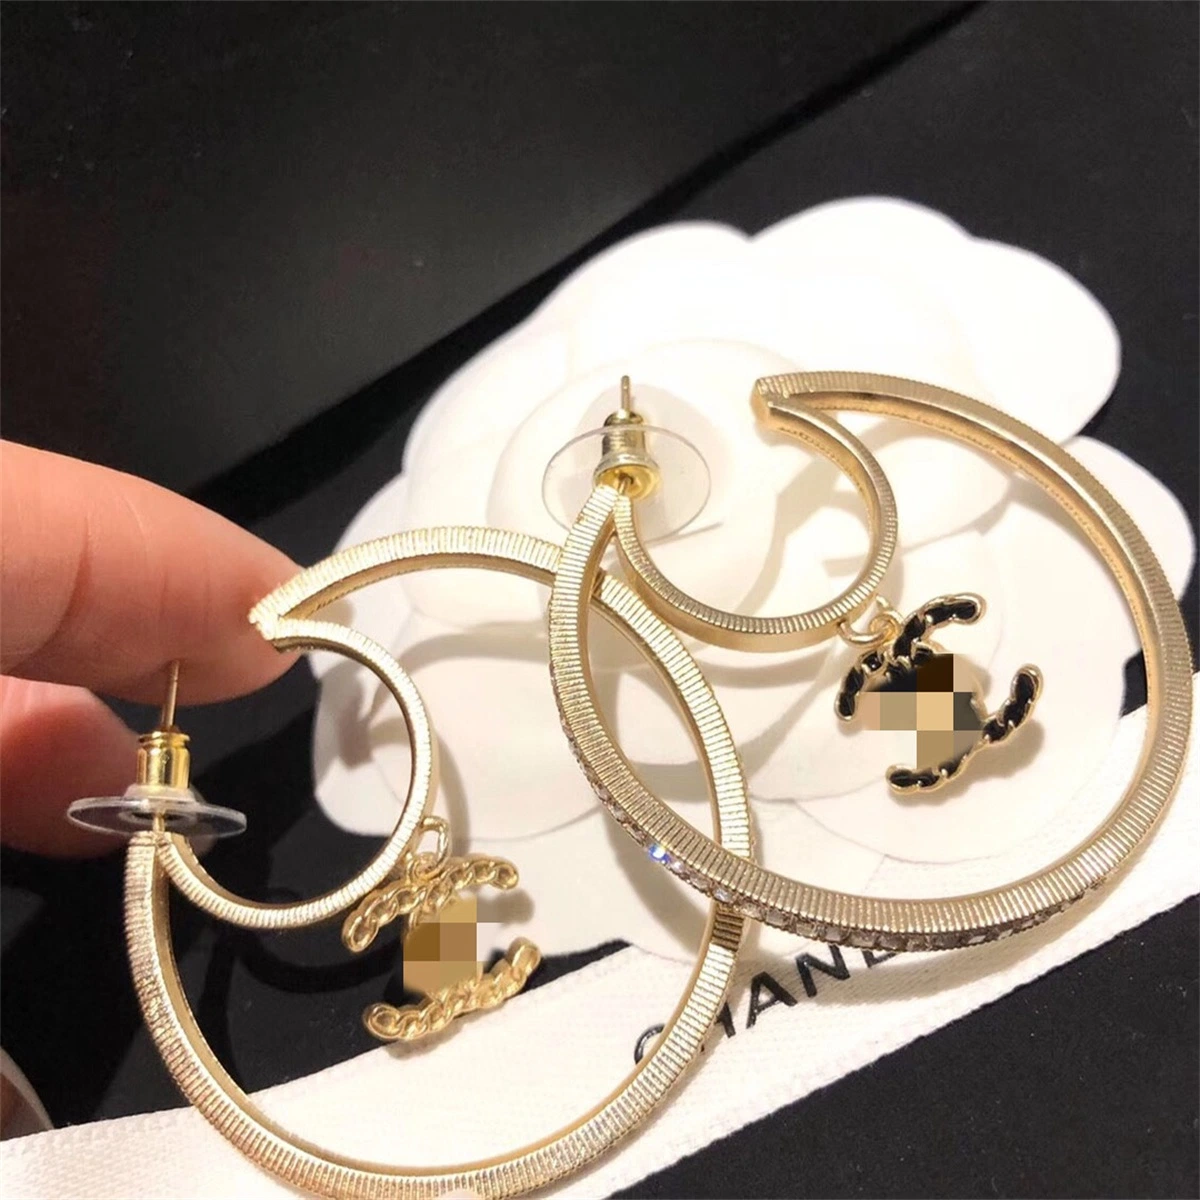 Classical Styles Big Circled Earrings Gold Earrings Fashion Designer Jewelry